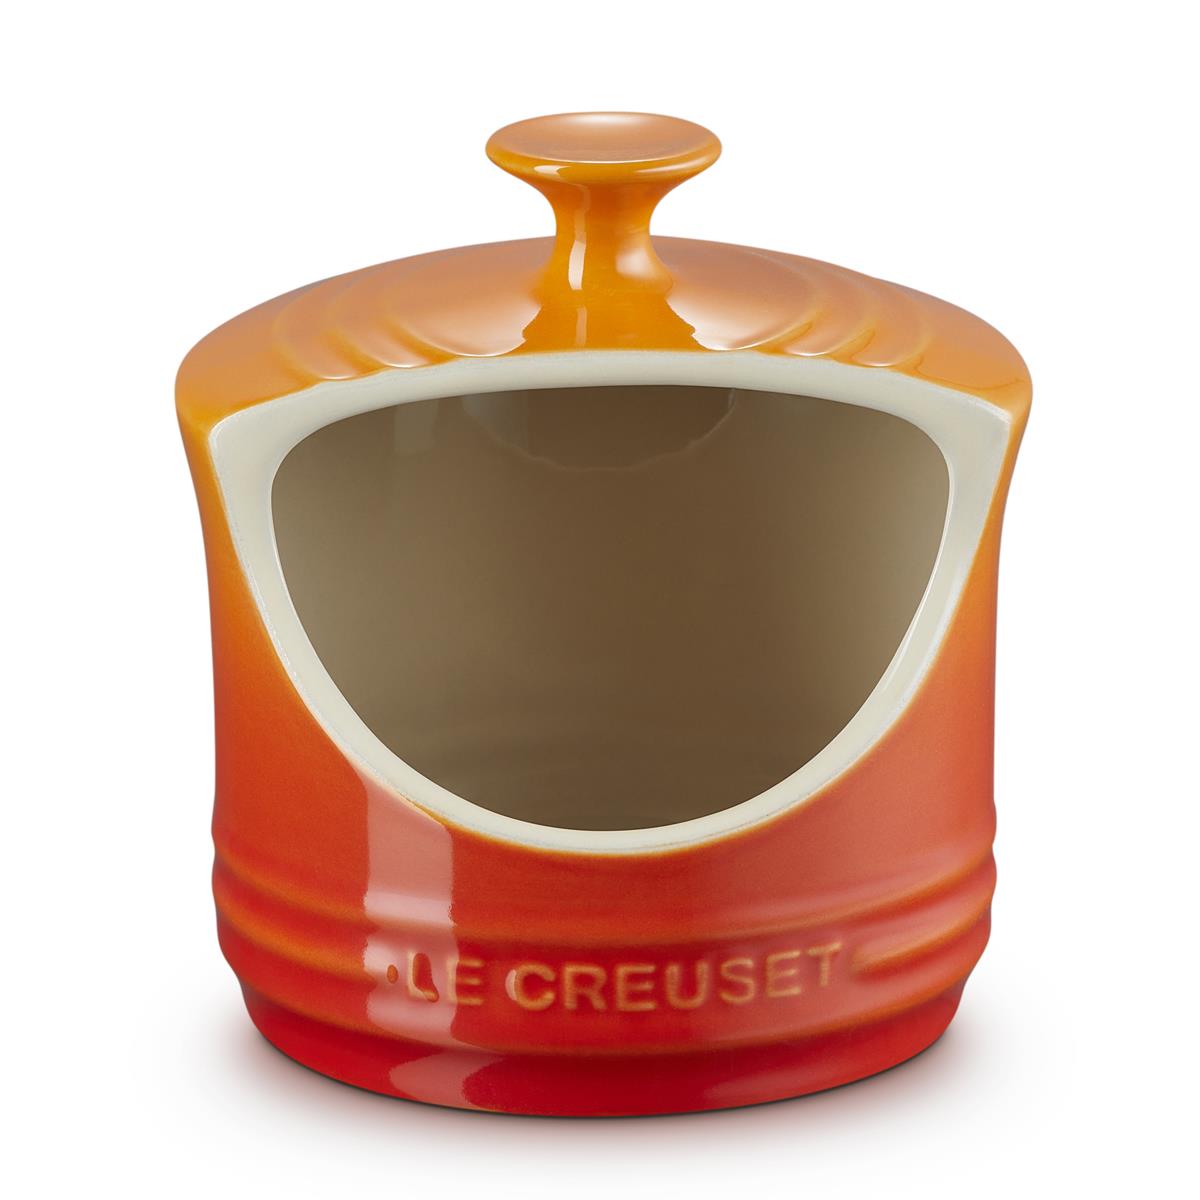 In which spots can the le creuset salt pig be positioned?